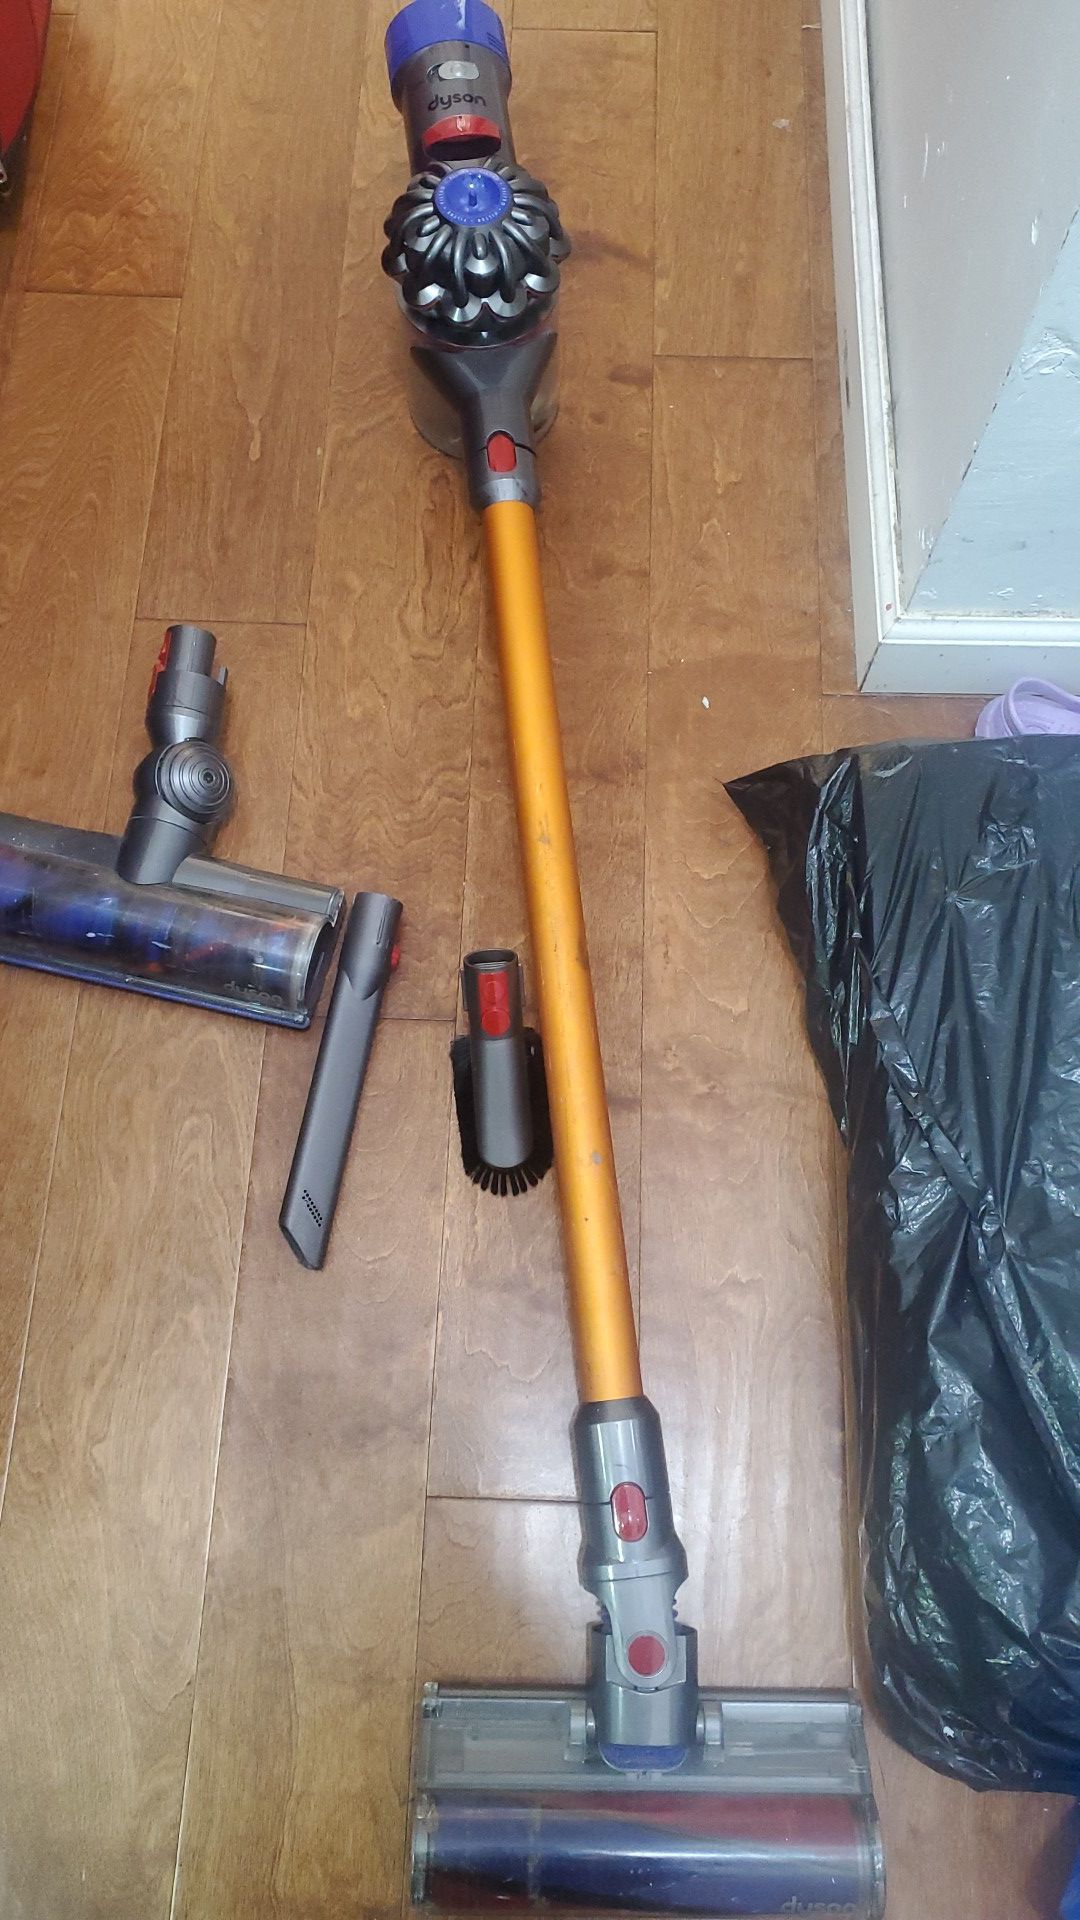 Dyson V8 Absolute cordless stick vaccuum